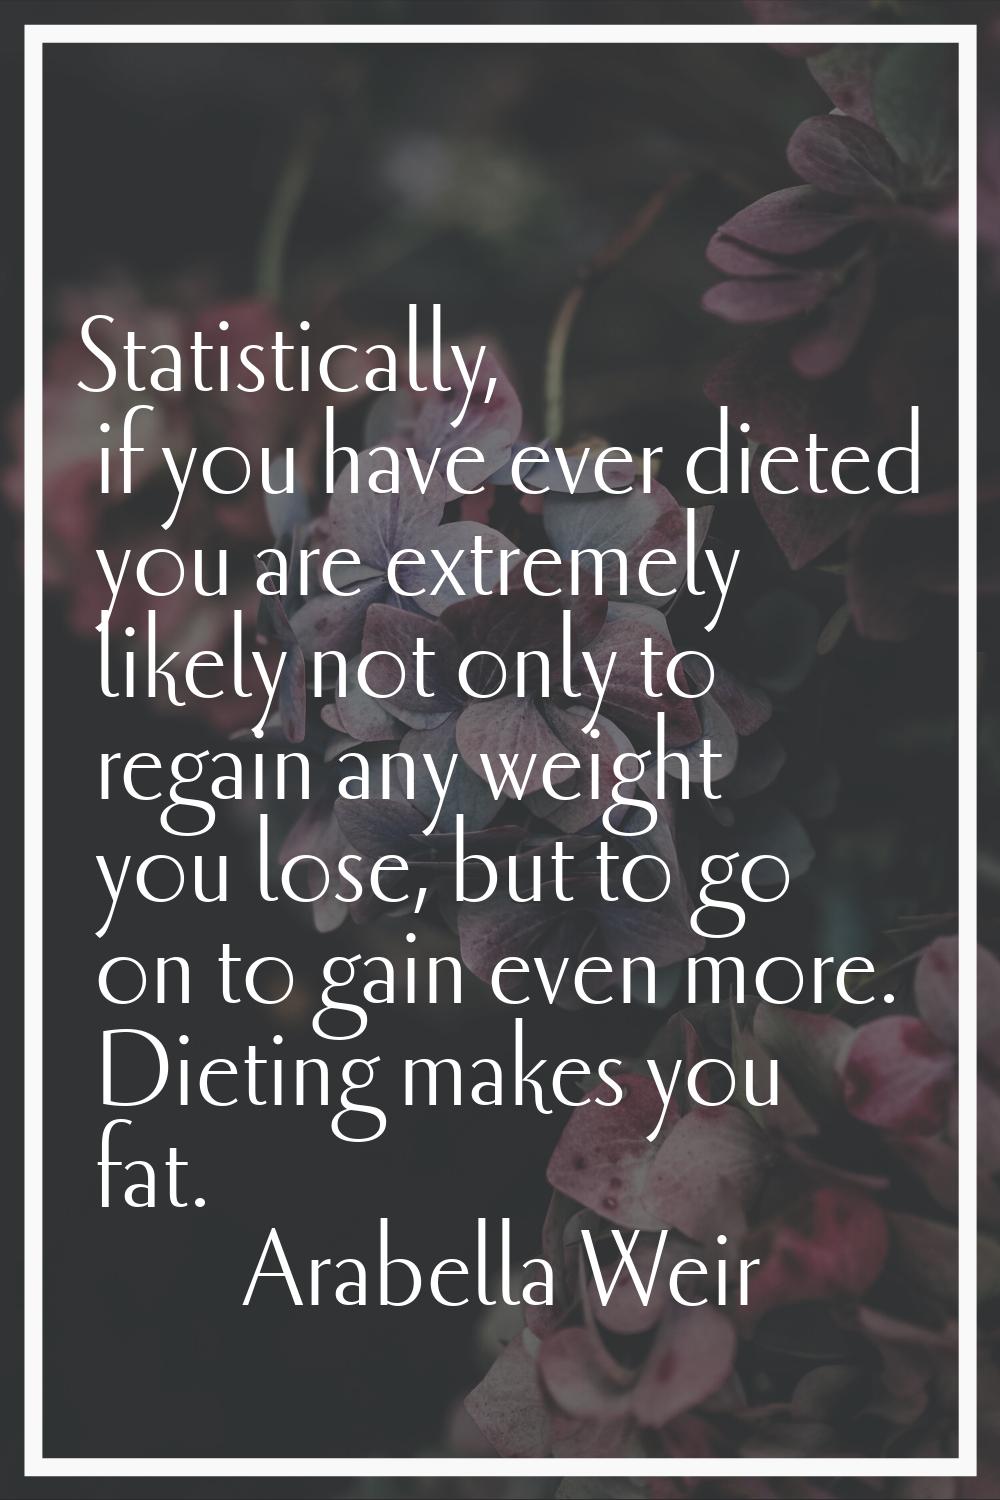 Statistically, if you have ever dieted you are extremely likely not only to regain any weight you l